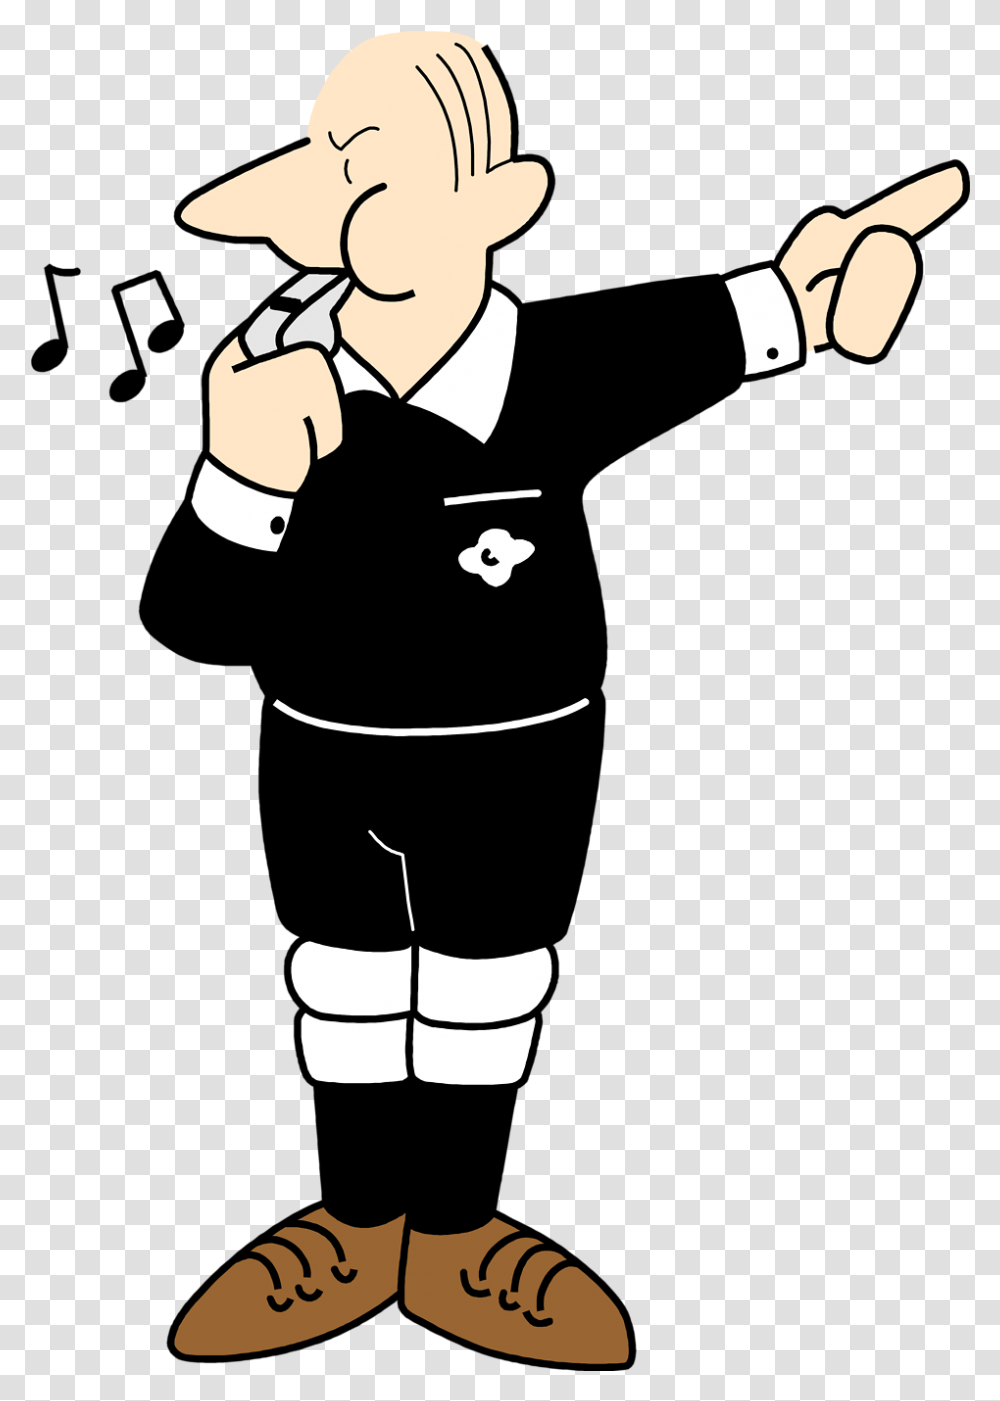 Library Of Football Referee Vector Free Referee Whistle Clip Art, Sailor Suit, Stencil, Hand Transparent Png